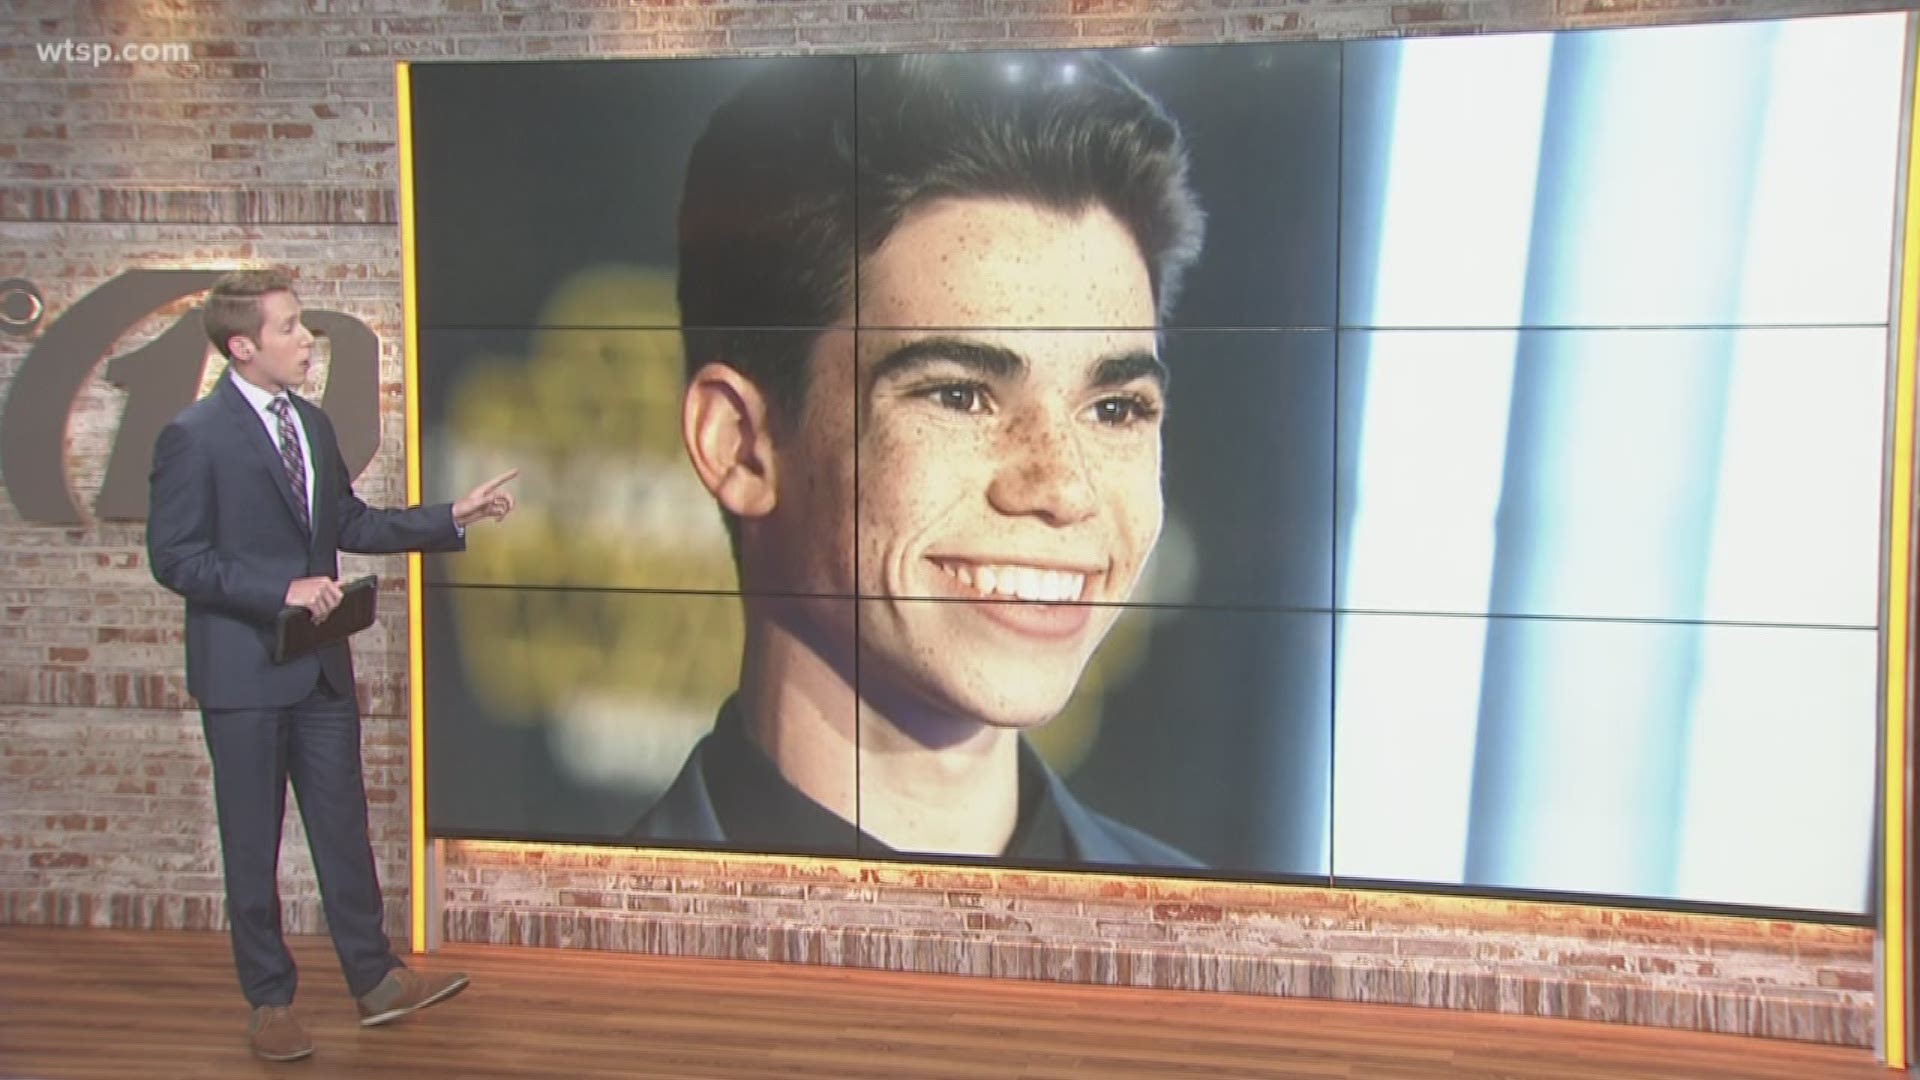 Cameron Boyce, a young star who appeared in several Disney Channel television shows and movies, has died. He was 20 years old.

Boyce's family confirmed the actor's death to ABC News on Saturday.